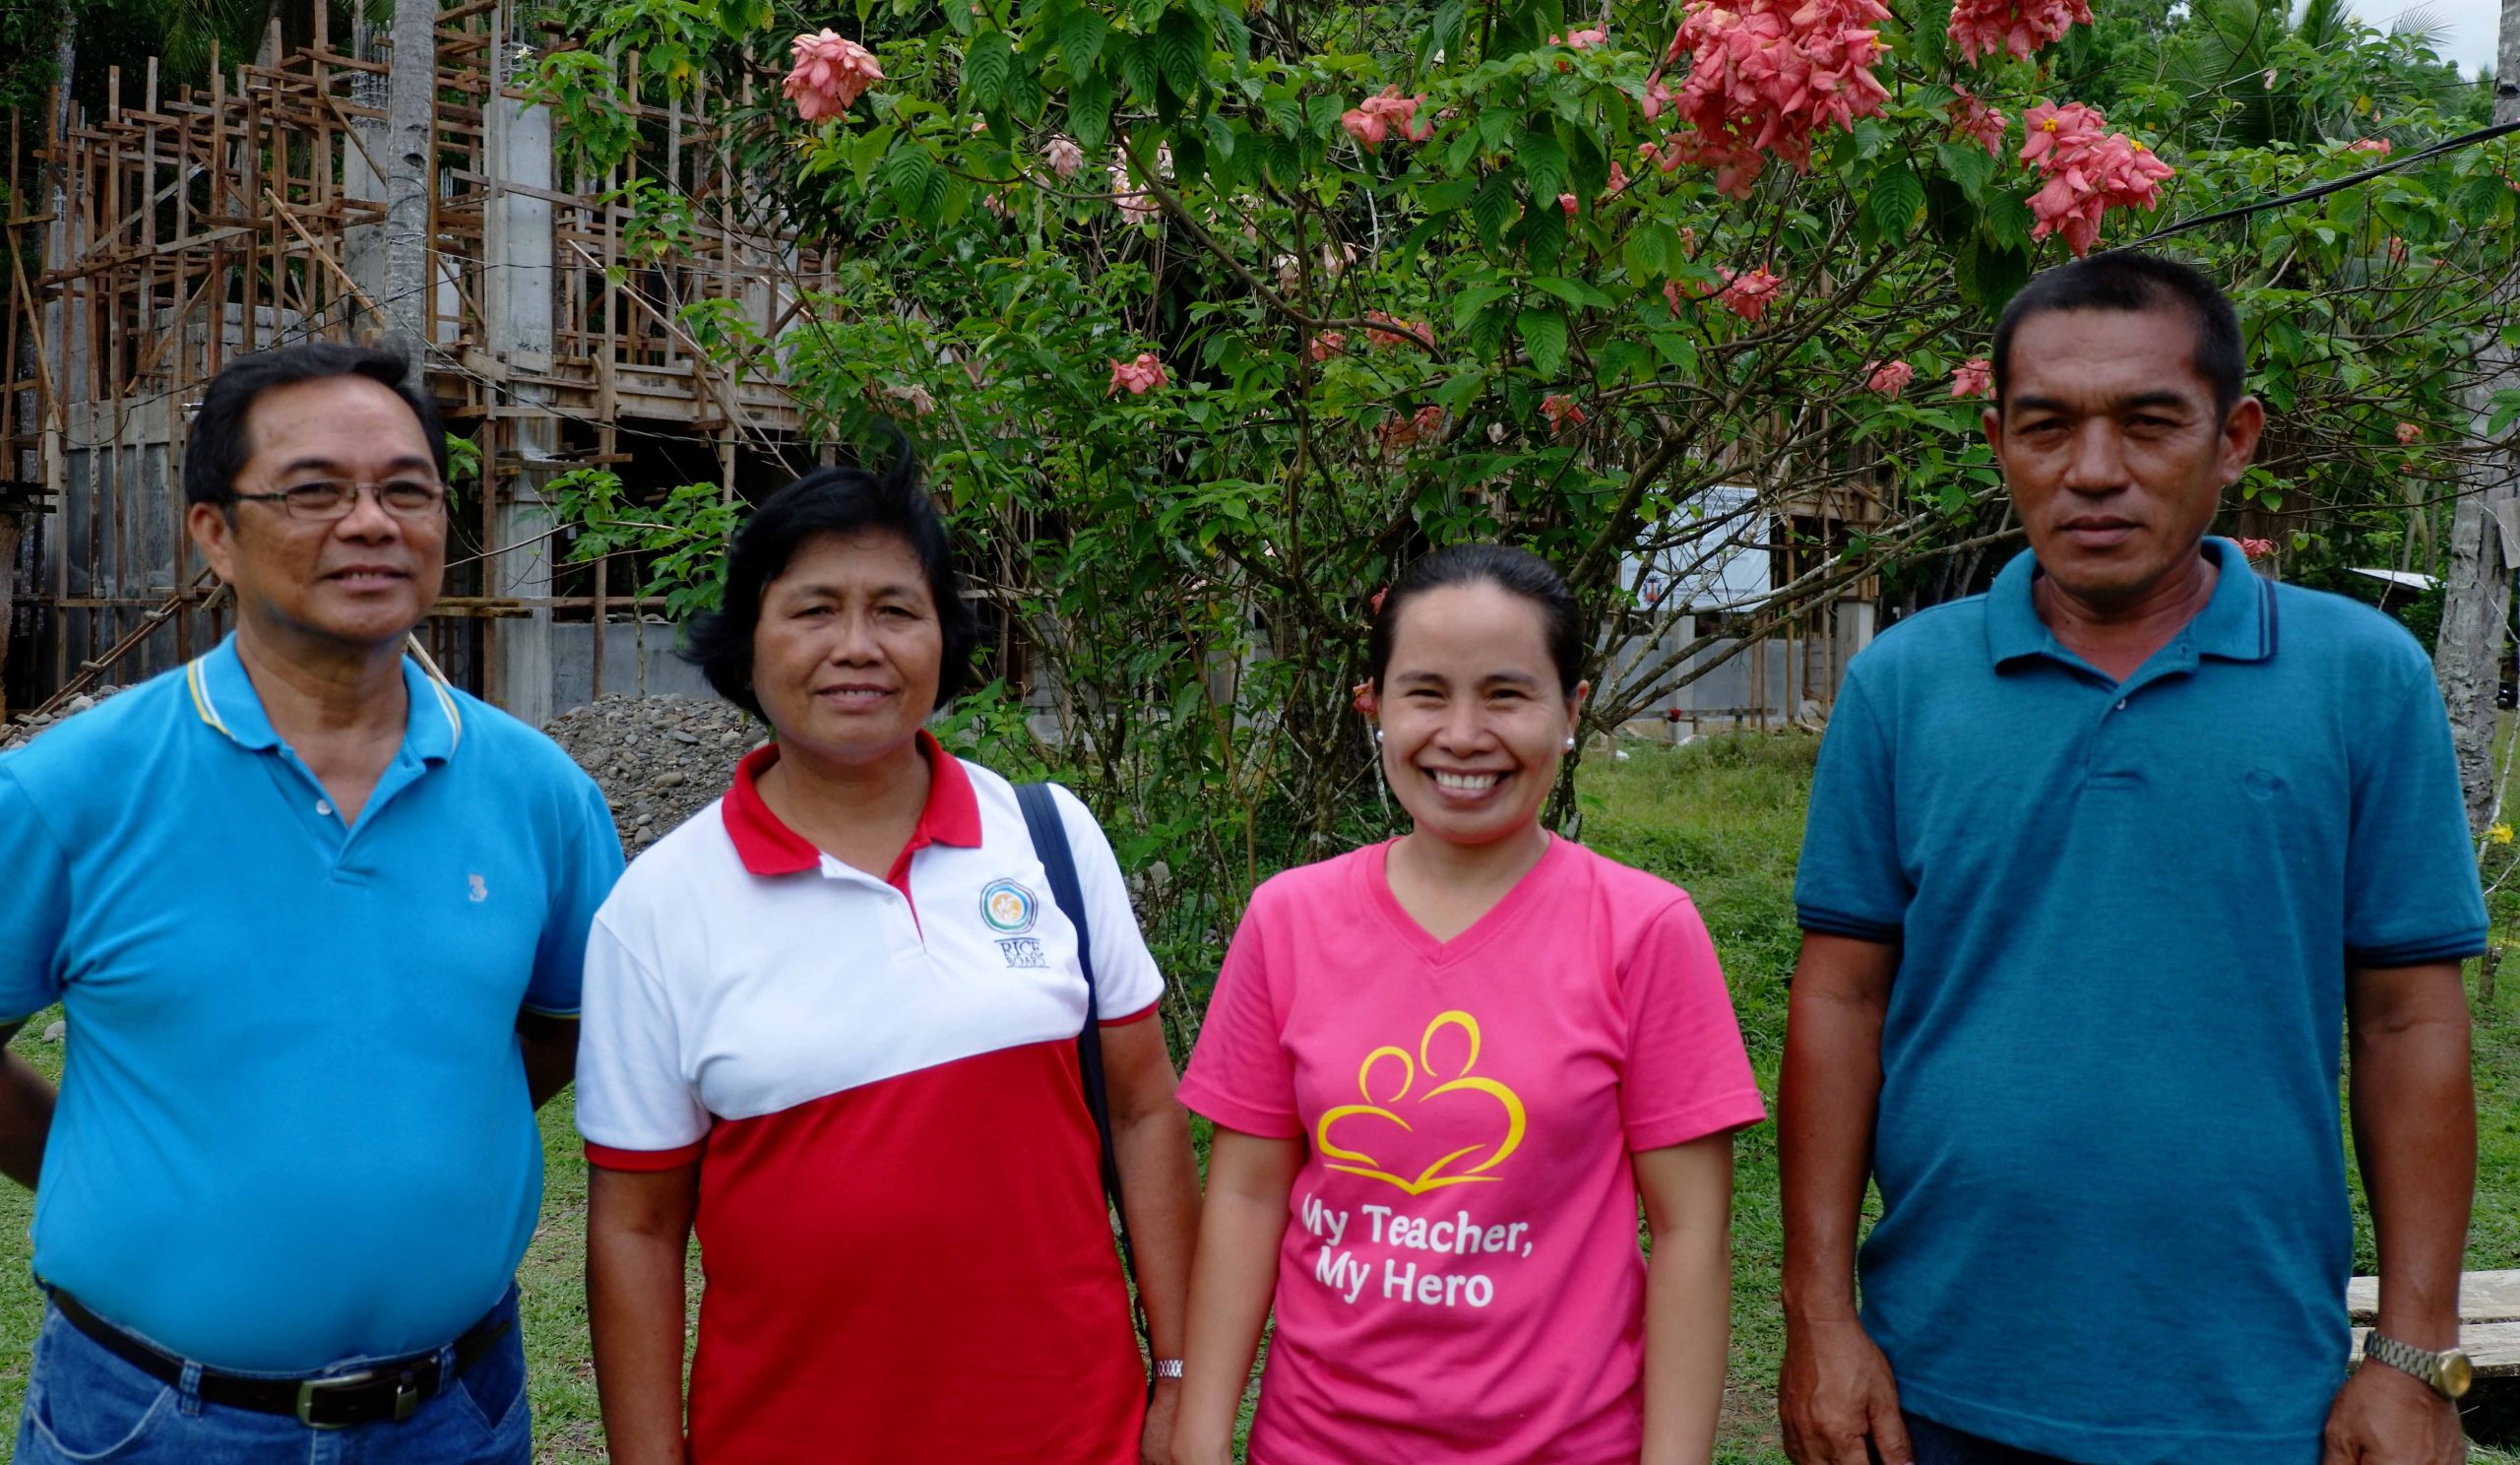 Local School in Dipolog City optimistic about partnership with DA-SAAD